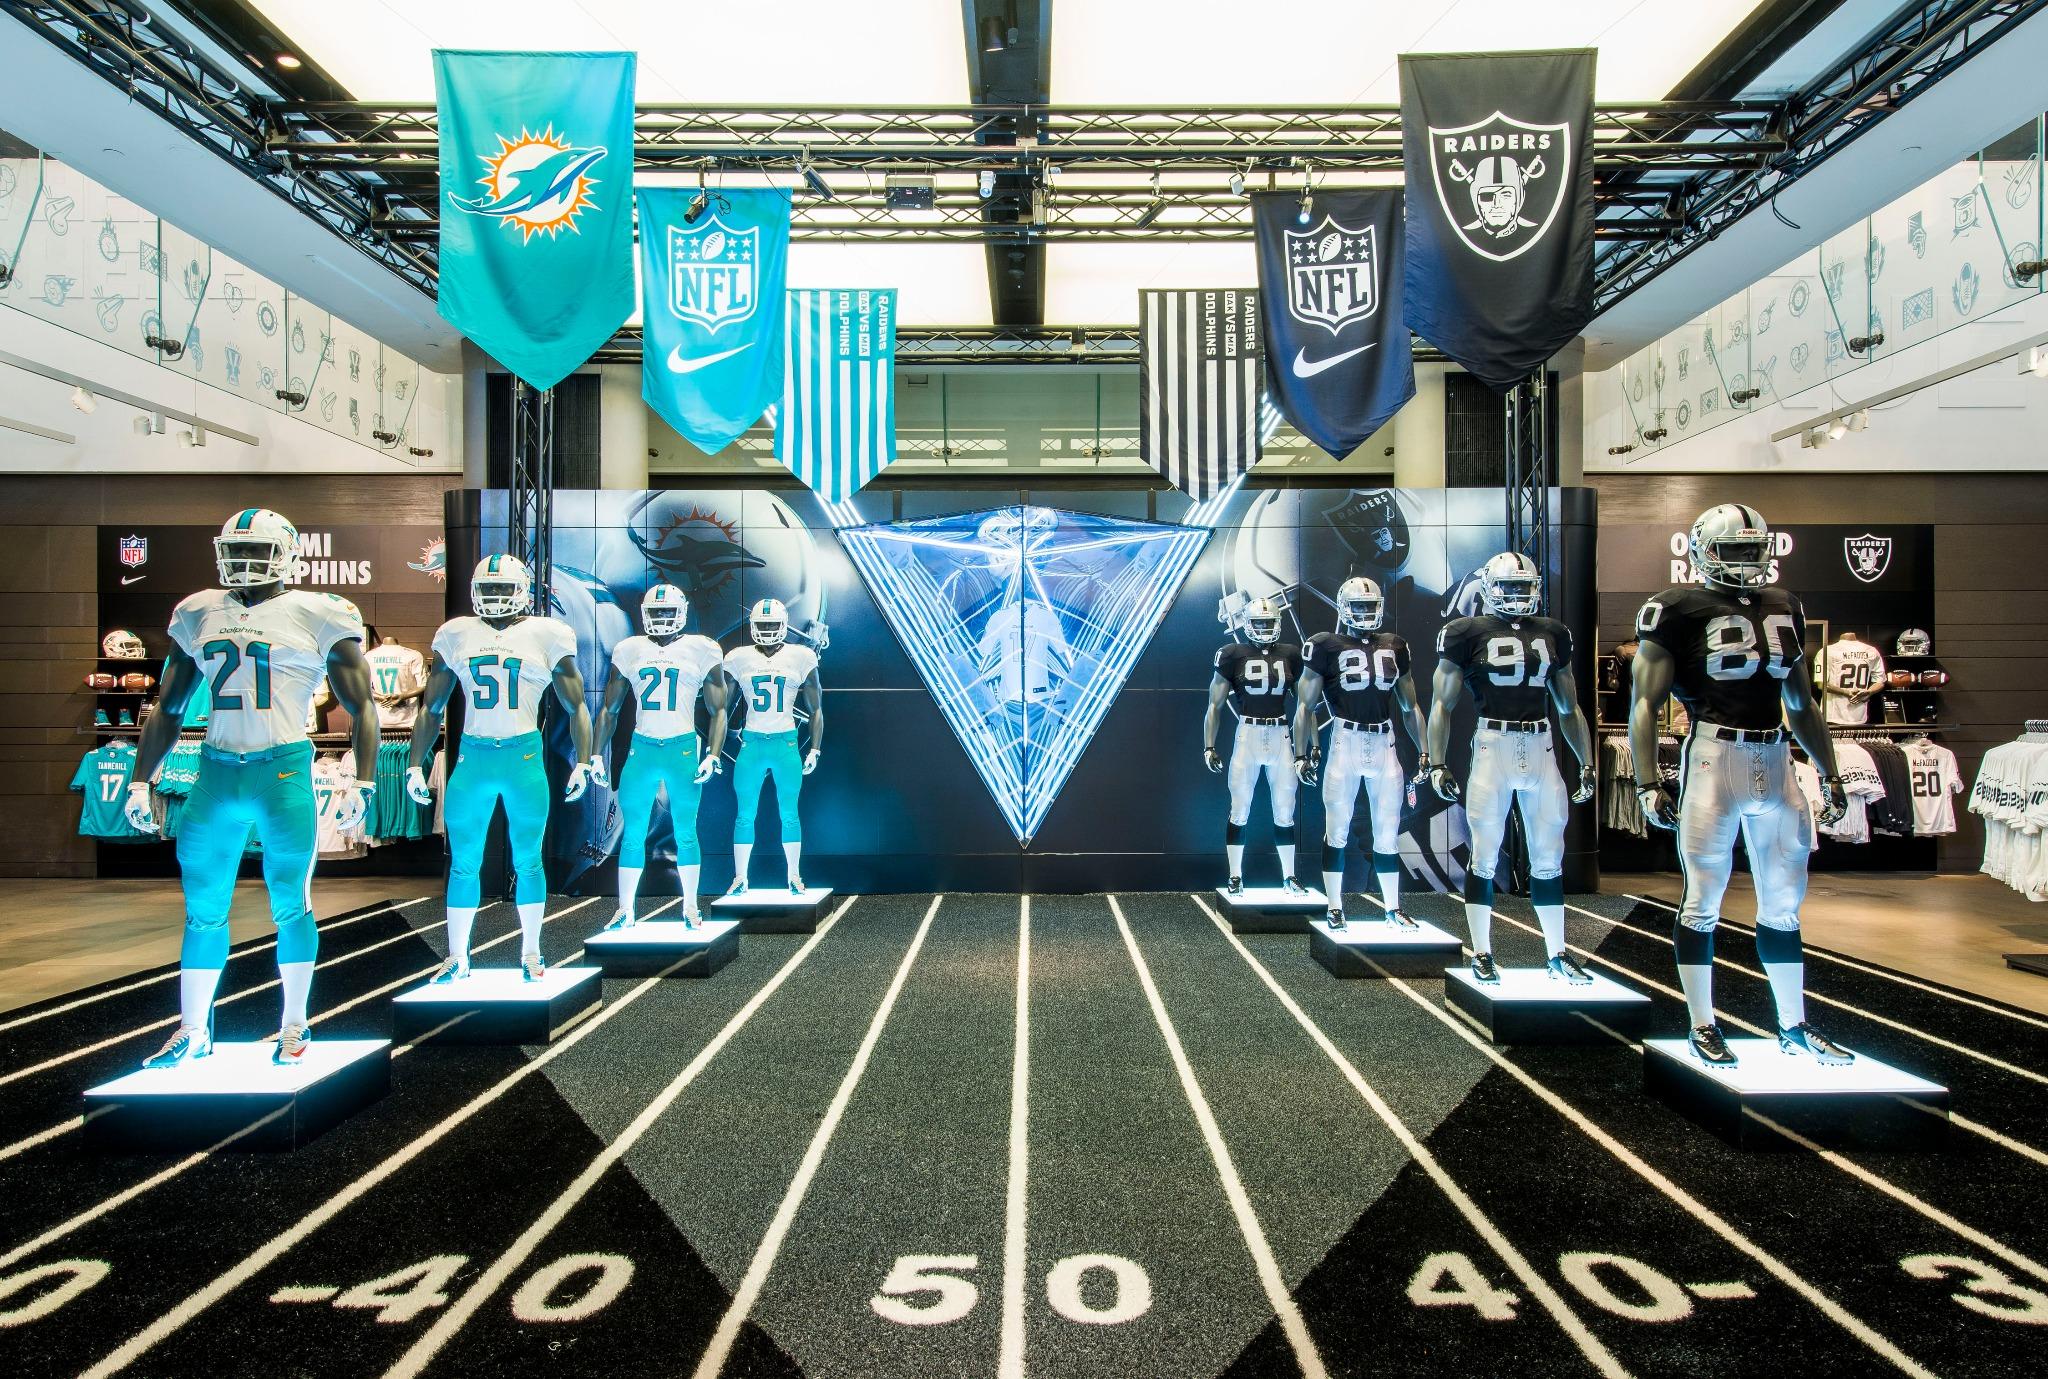 a pesar de Acompañar Diez NFL UK on Twitter: "Nike Town in London with @NikeUK is fully stocked with  NFL jerseys. PHOTOS here - http://t.co/9eFyrr6Exy #NFLUK  http://t.co/AmDqkapCEi" / Twitter